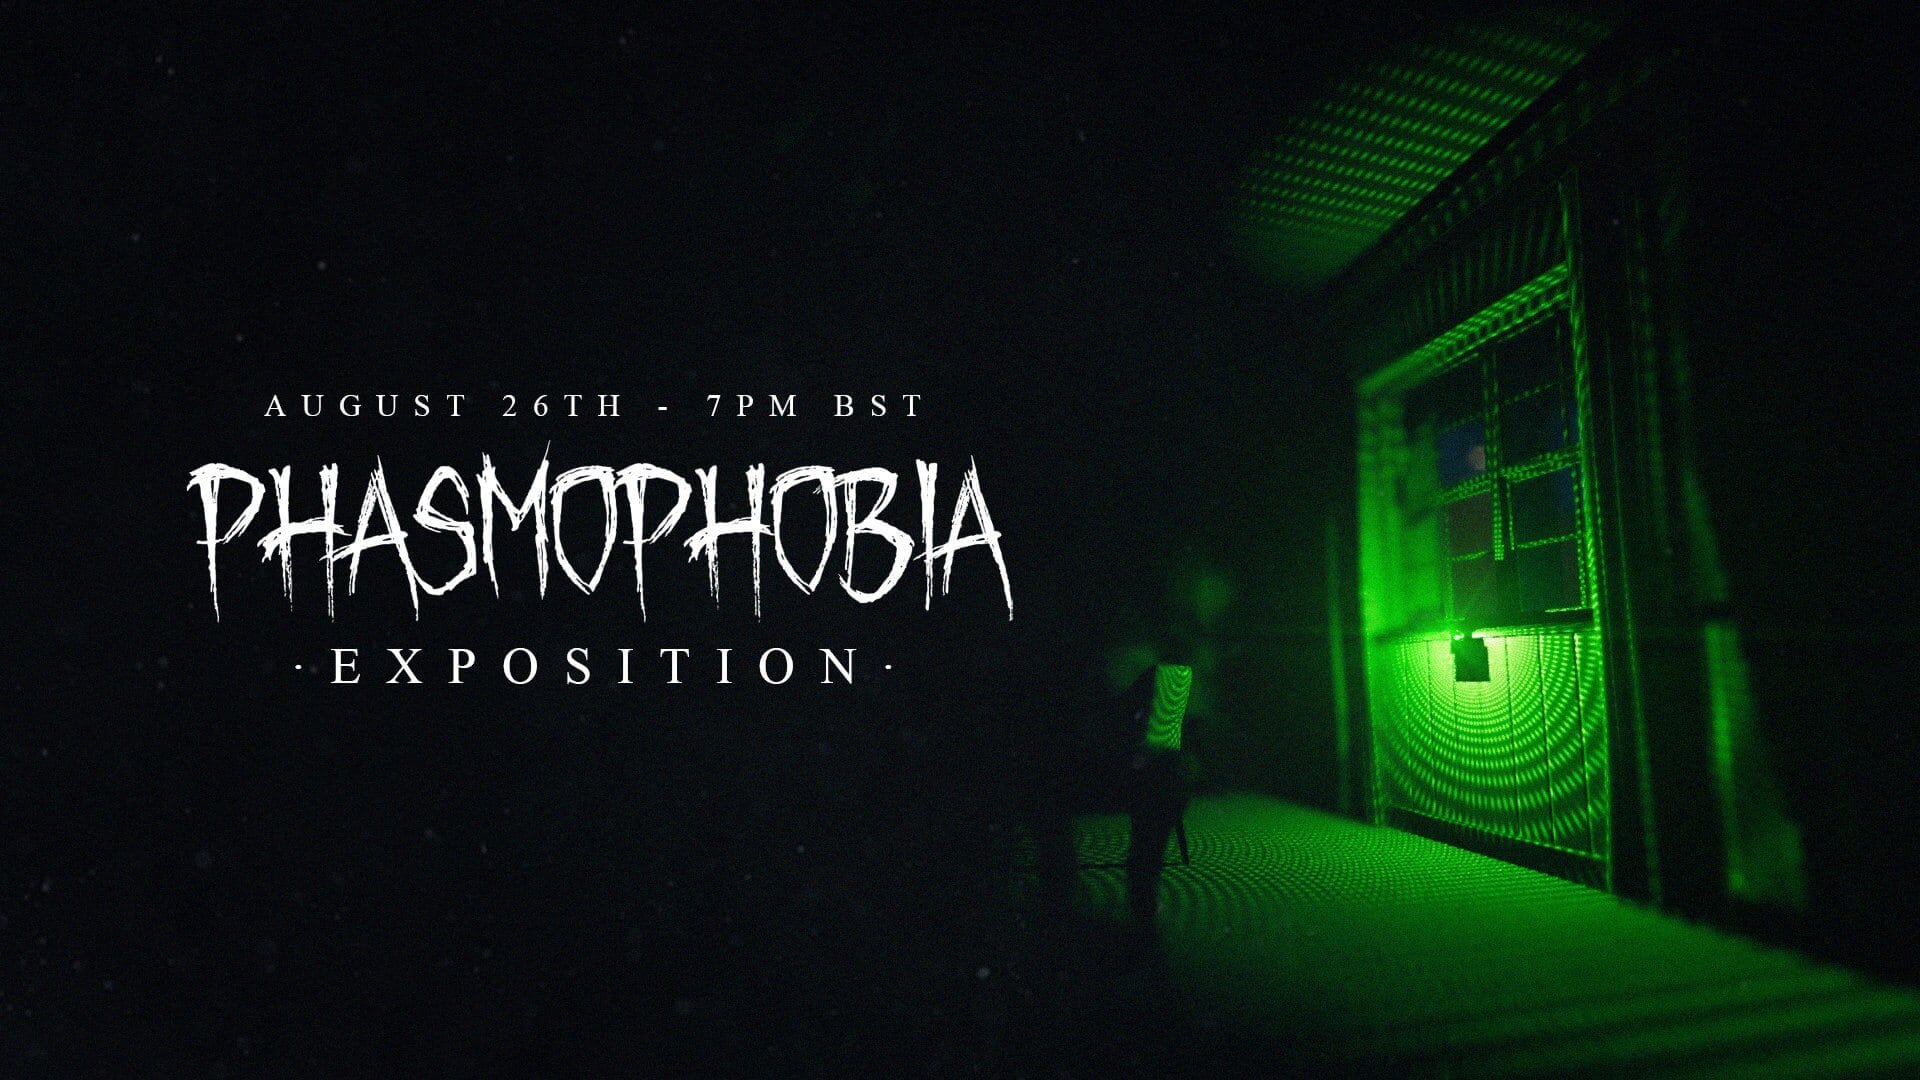 A spooky banner announcing today's new Phasmophobia update